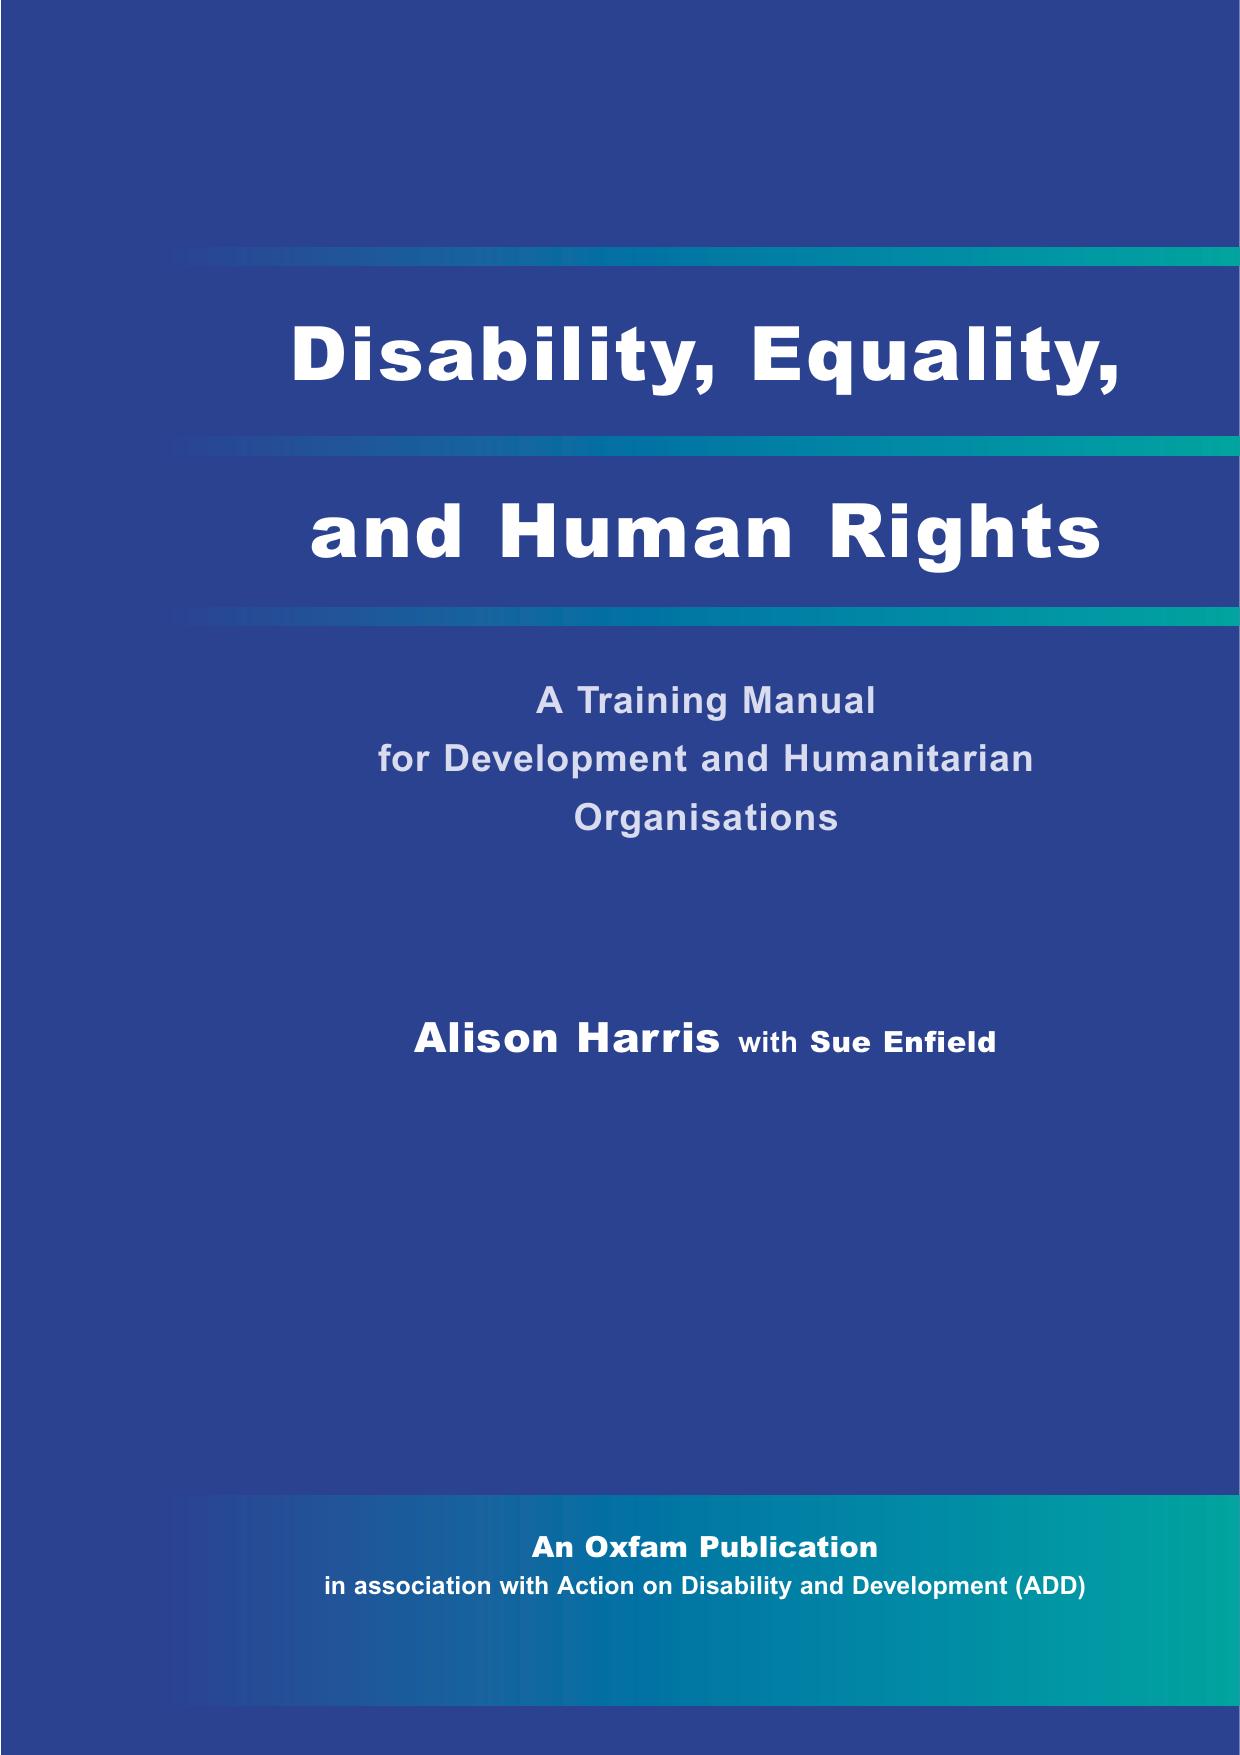 Disability, equality and human rights : a training manual for development and humanitarian organisations